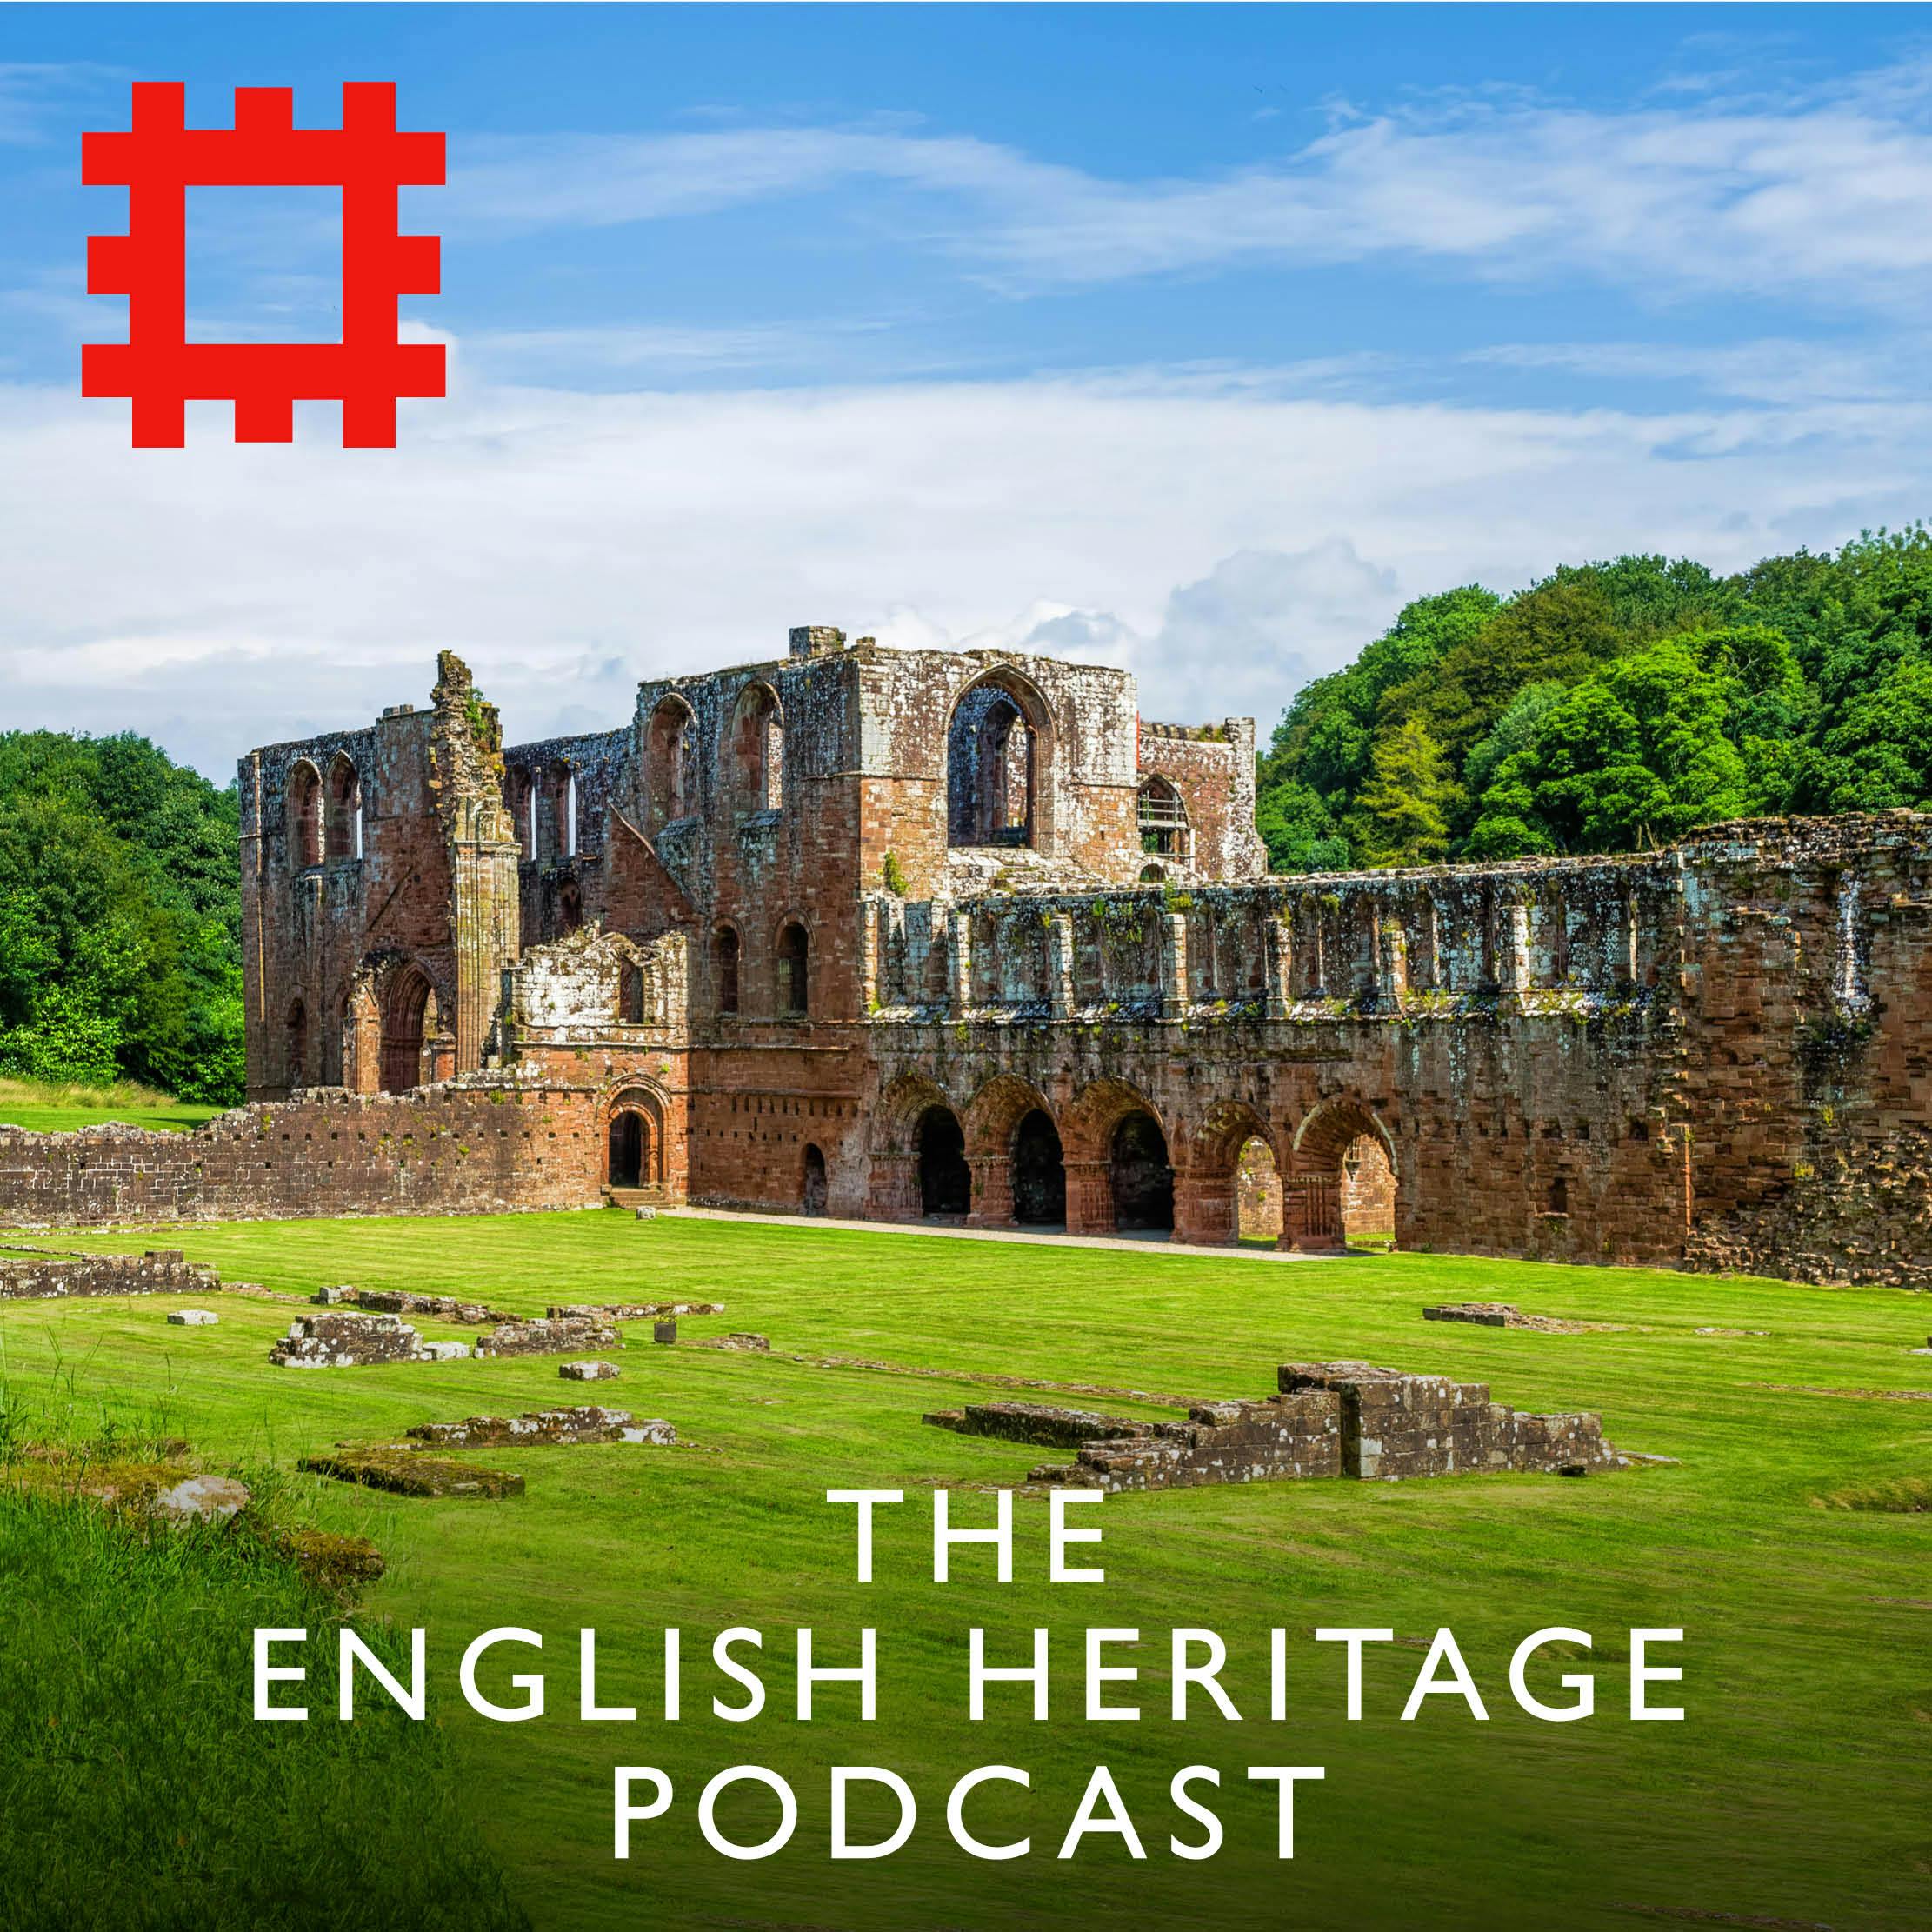 Episode 261 - 900 years of history at Furness Abbey